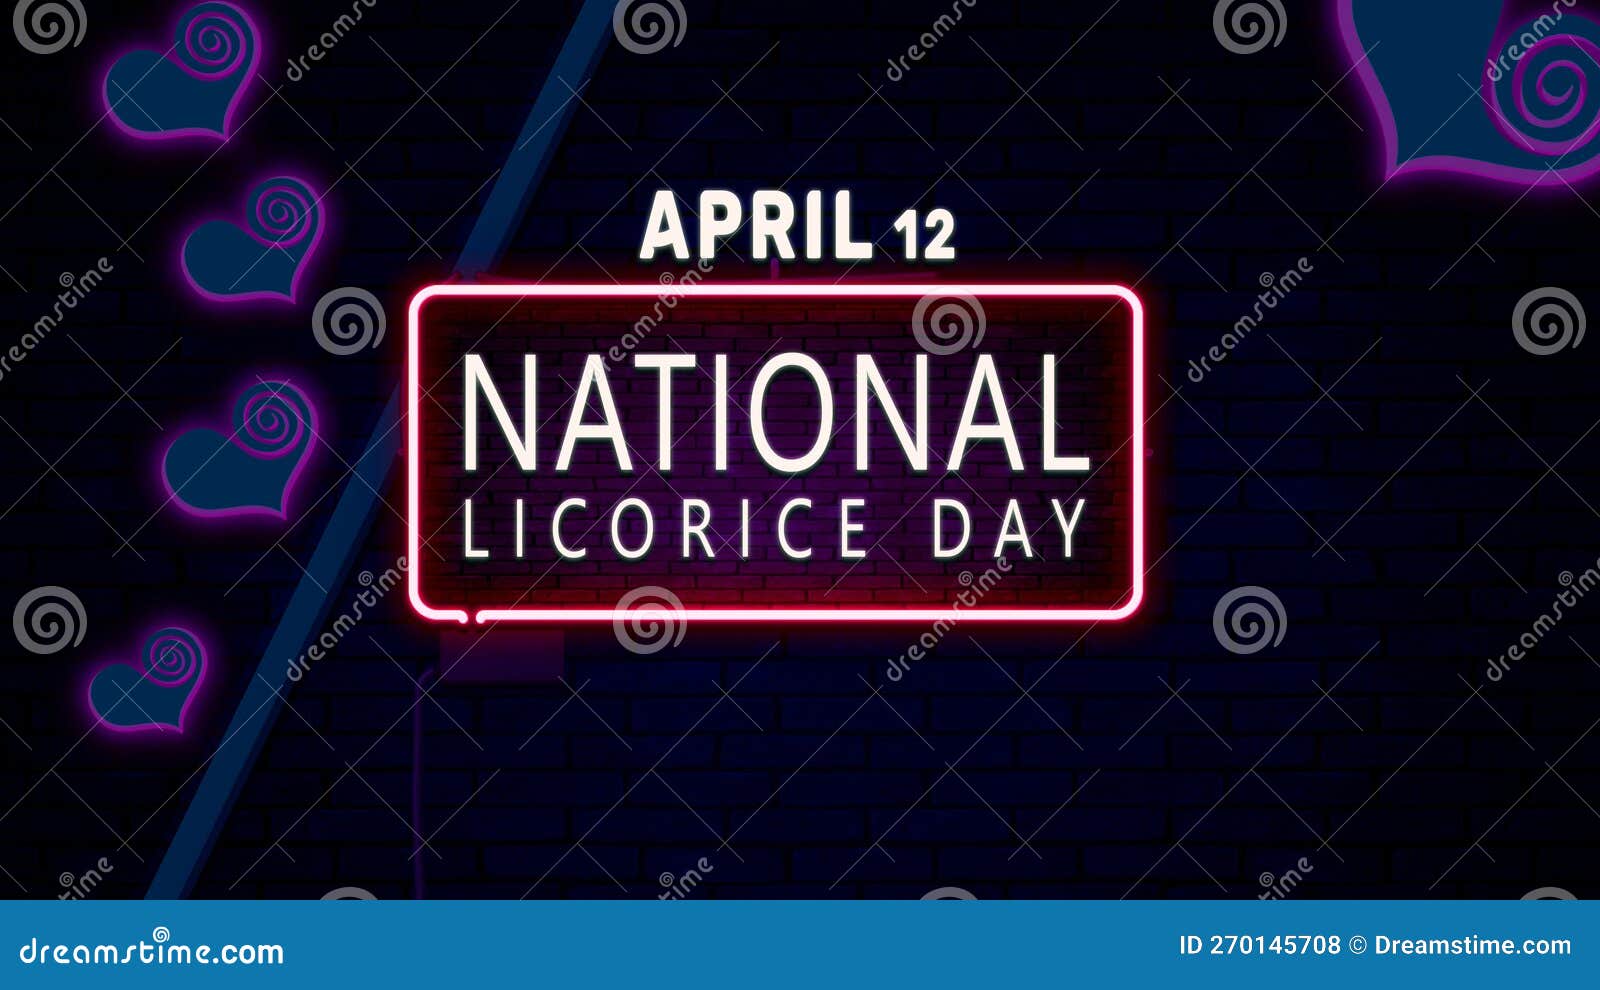 Happy National Licorice Day, April 12. Calendar of April Neon Text